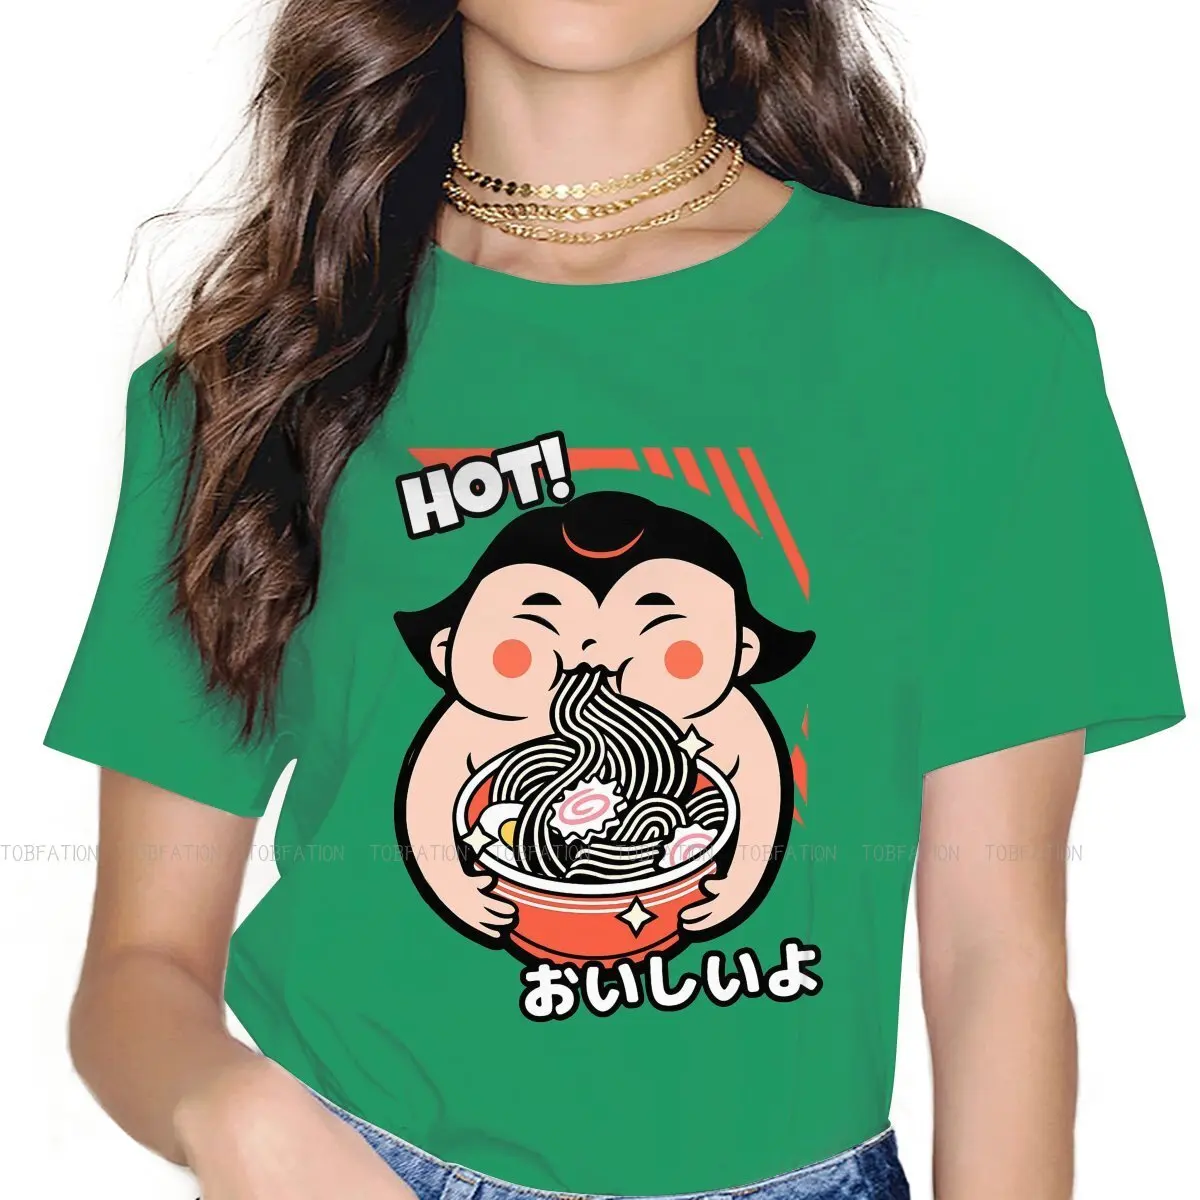 

Eating Ramen O Neck TShirt Japanese Sumo Wrestler Cultural Preference Sports Pure T Shirt Girl Individuality Plus Size Big Sale